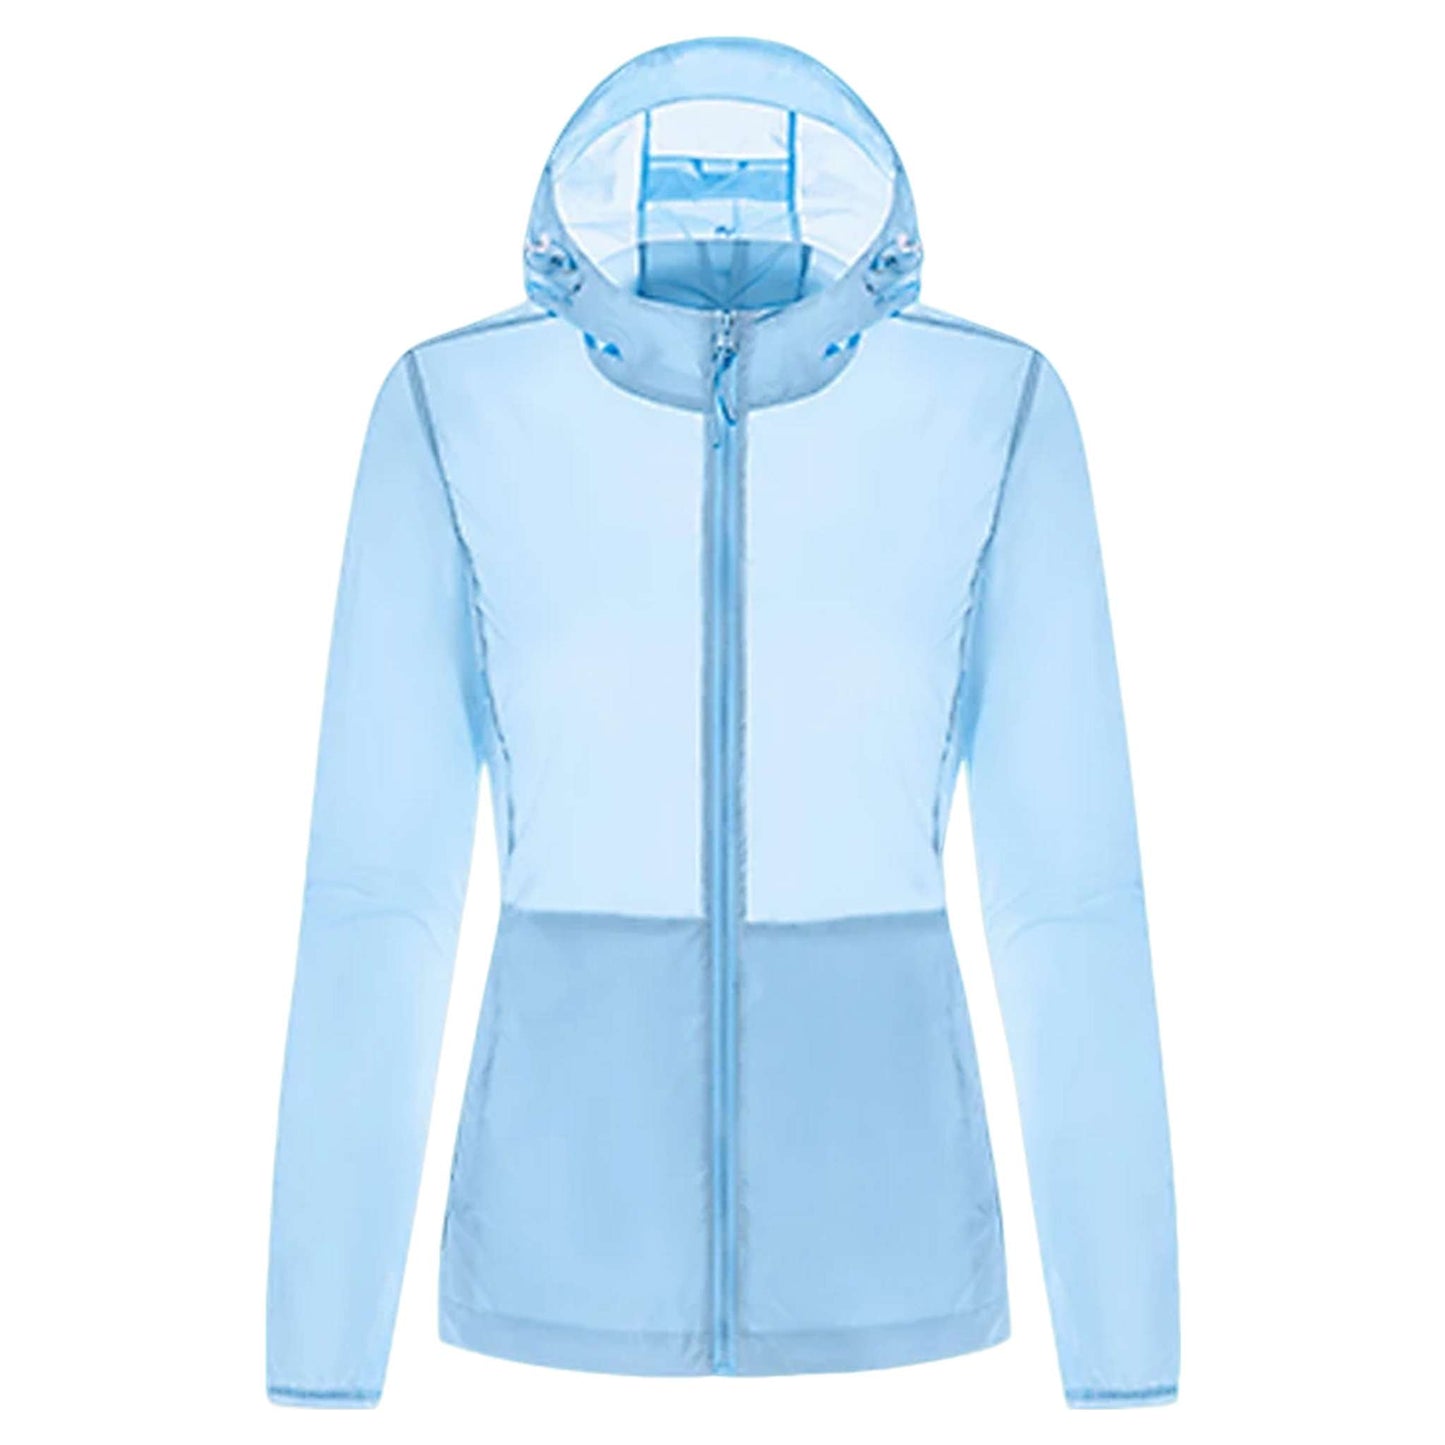 Women's Quick-Dry Breathable Skin Coat - Lightweight Outdoor Protection Jacket for Beach & Hiking